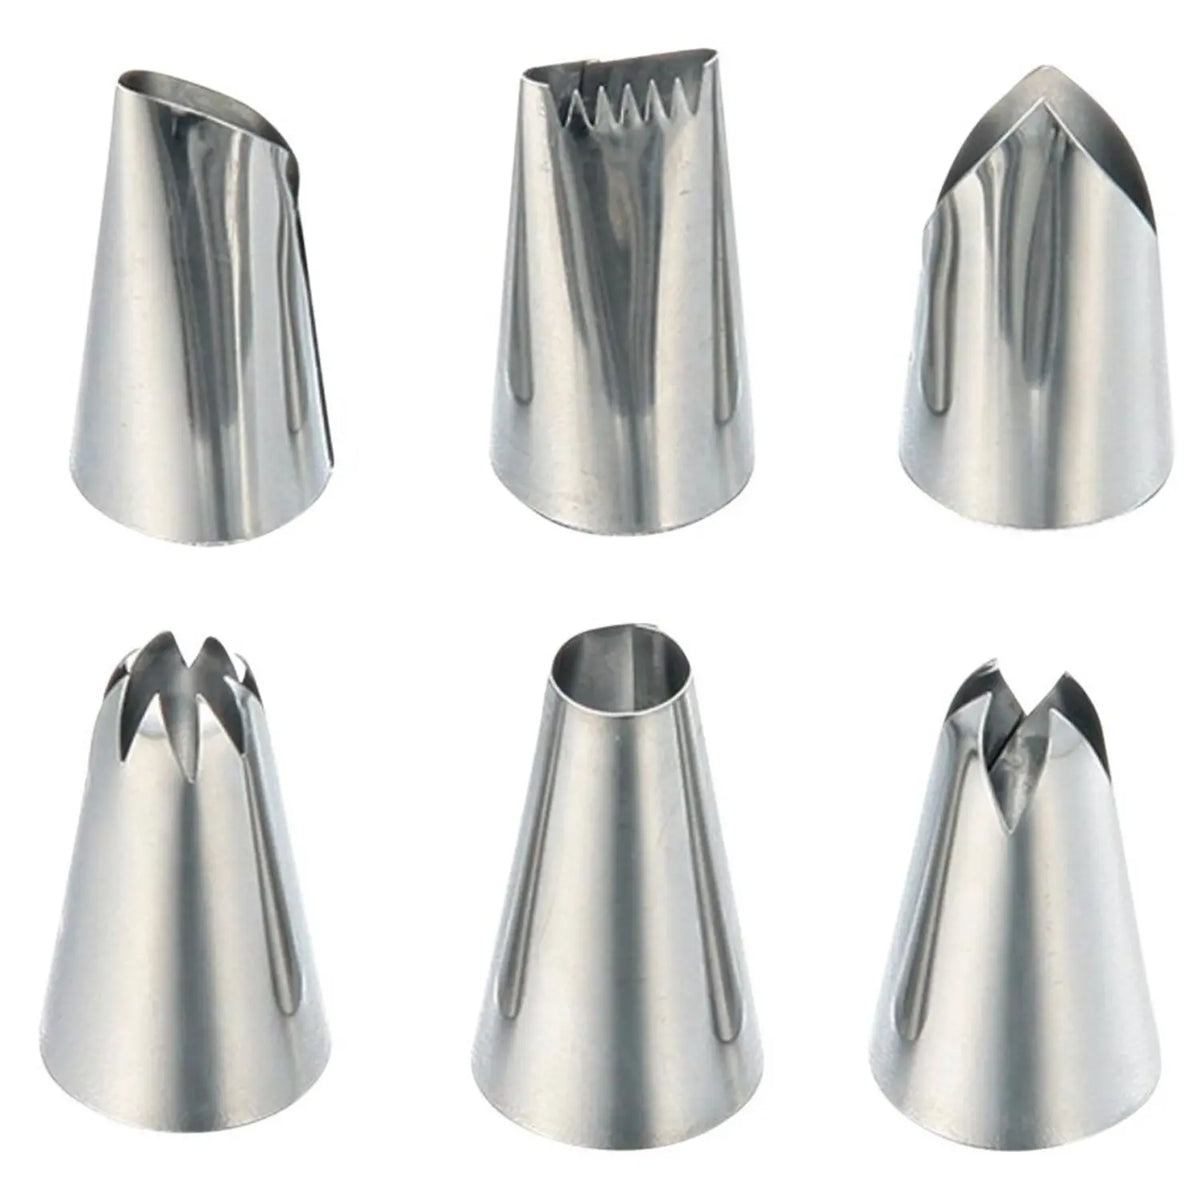 TIGERCROWN Cake Land Stainless Steel Piping Tips 6 pcs